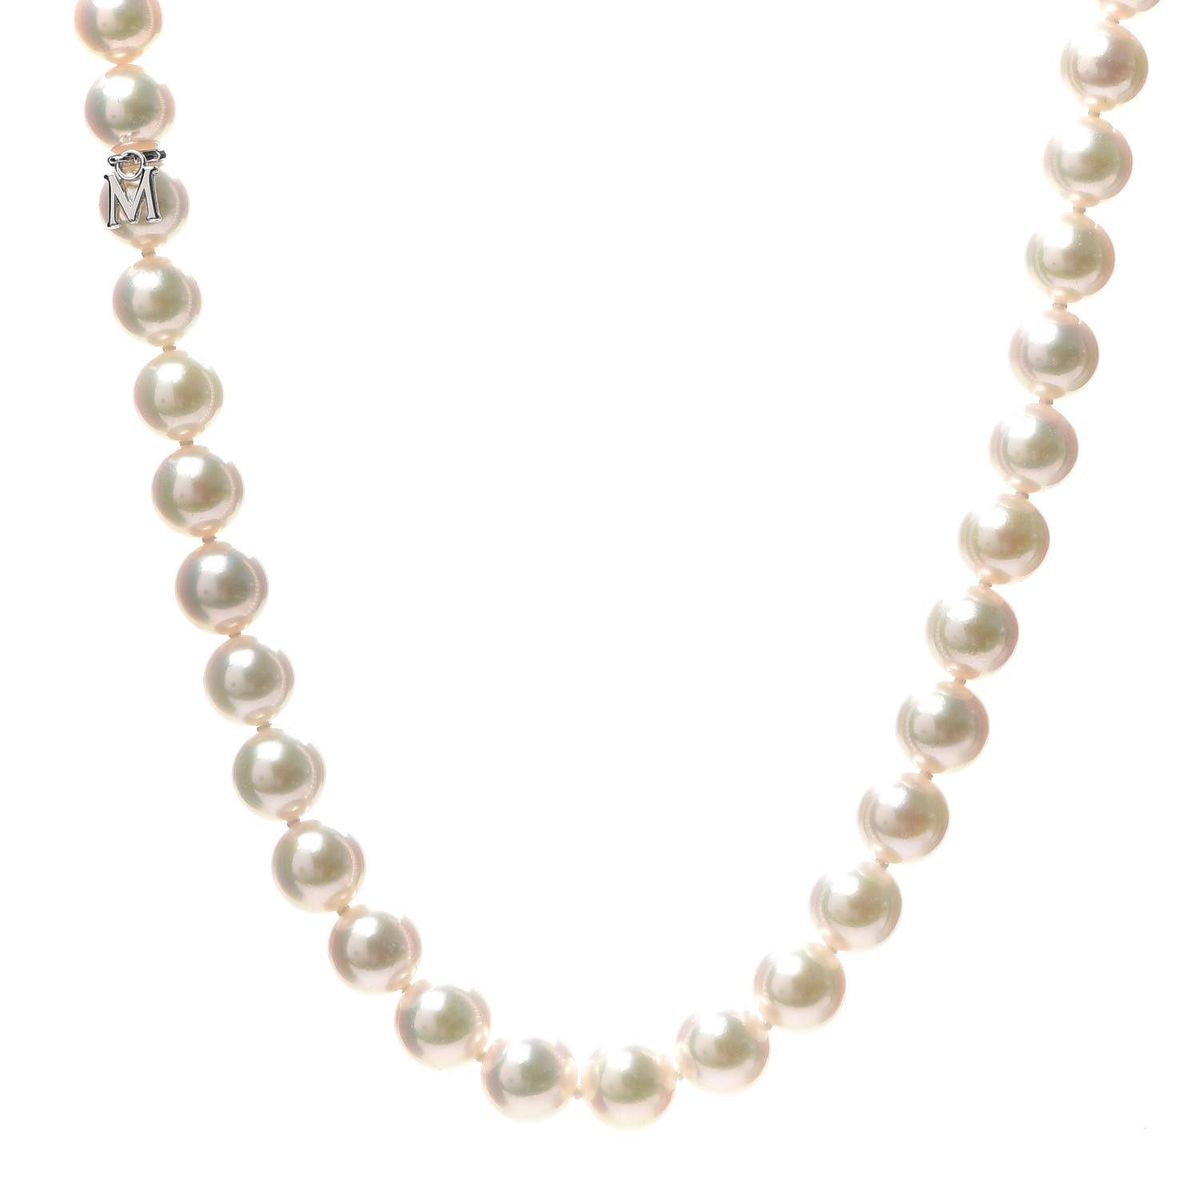 18K White Gold Akoya Pearl Necklace